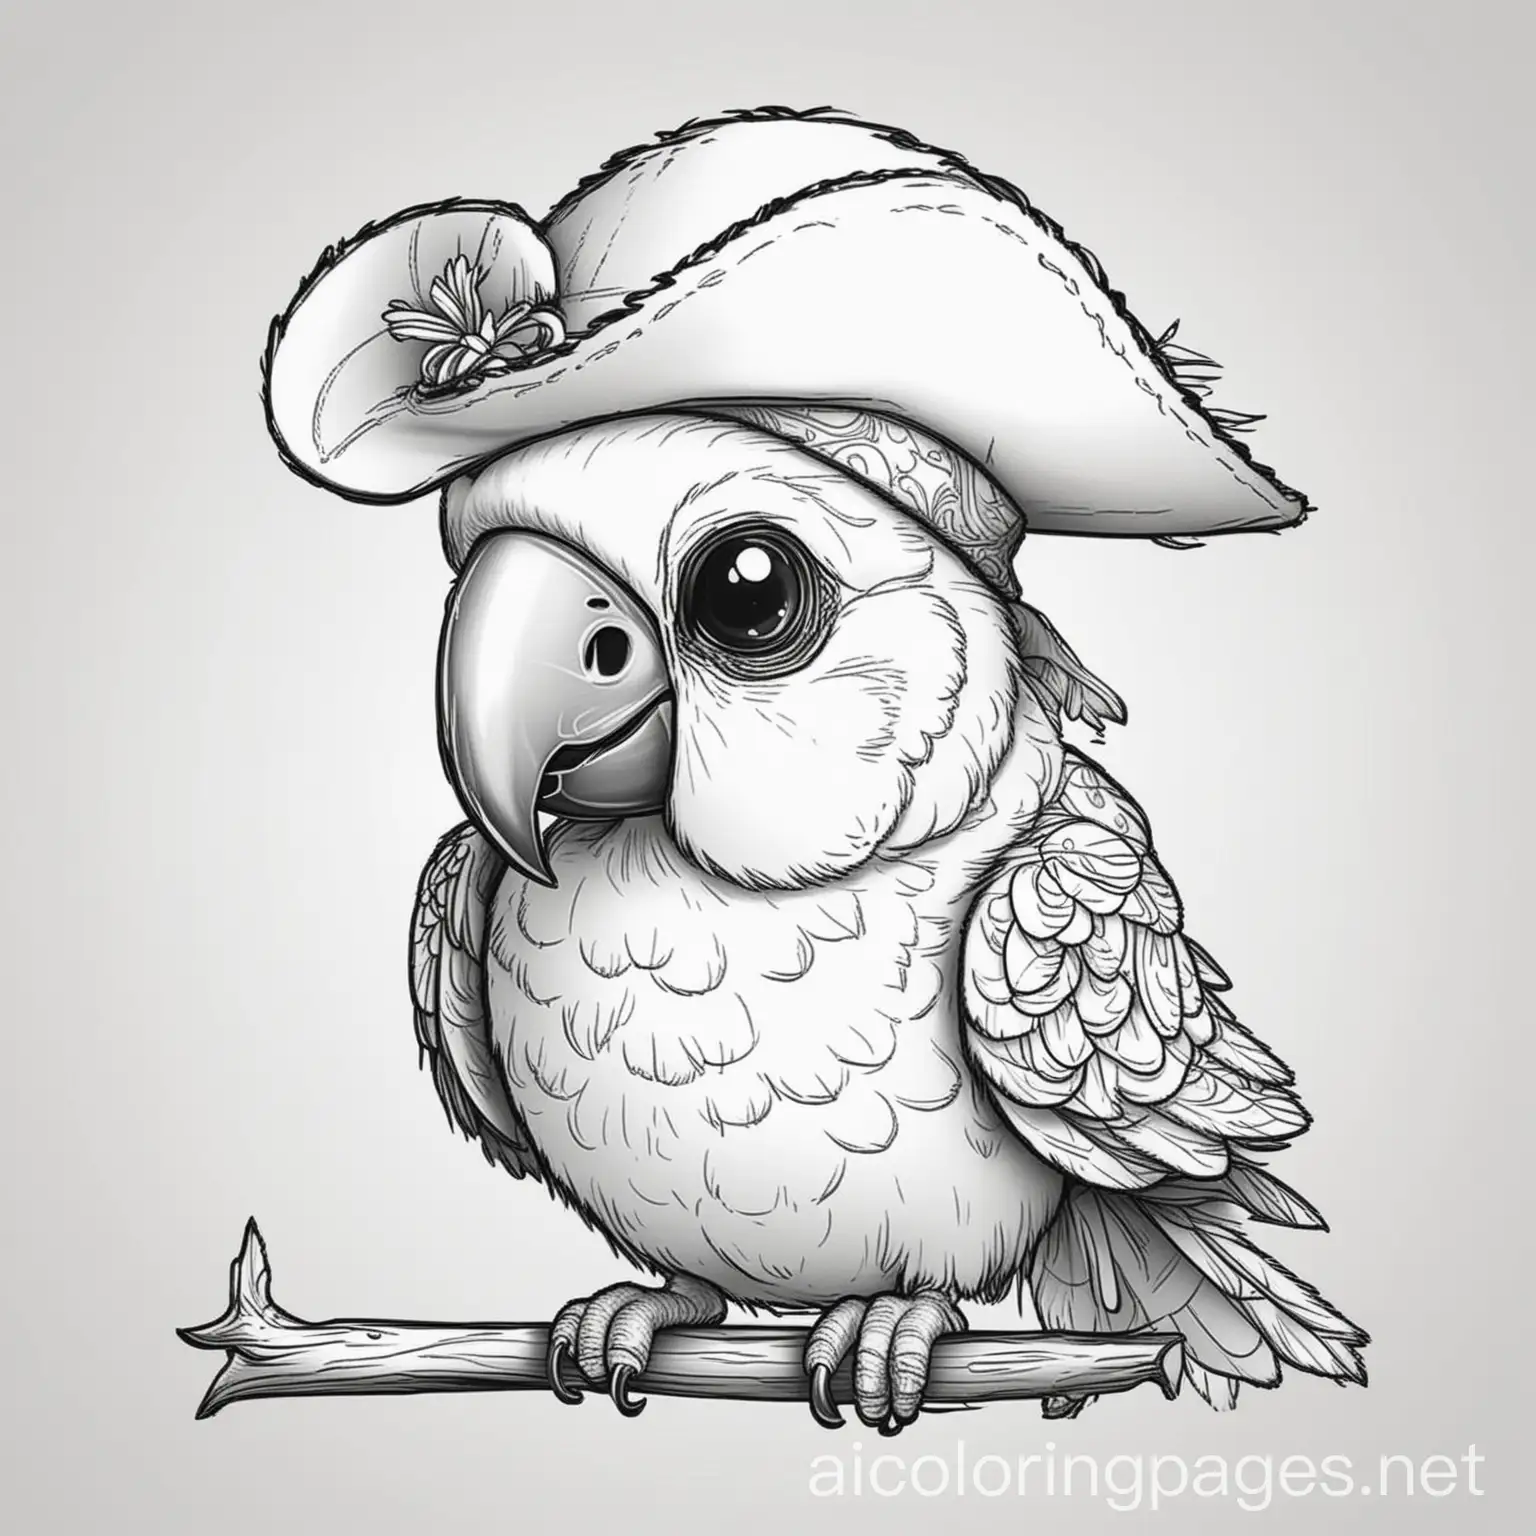 Adorable-Parrot-Coloring-Page-with-Pirate-Hat-for-Kids